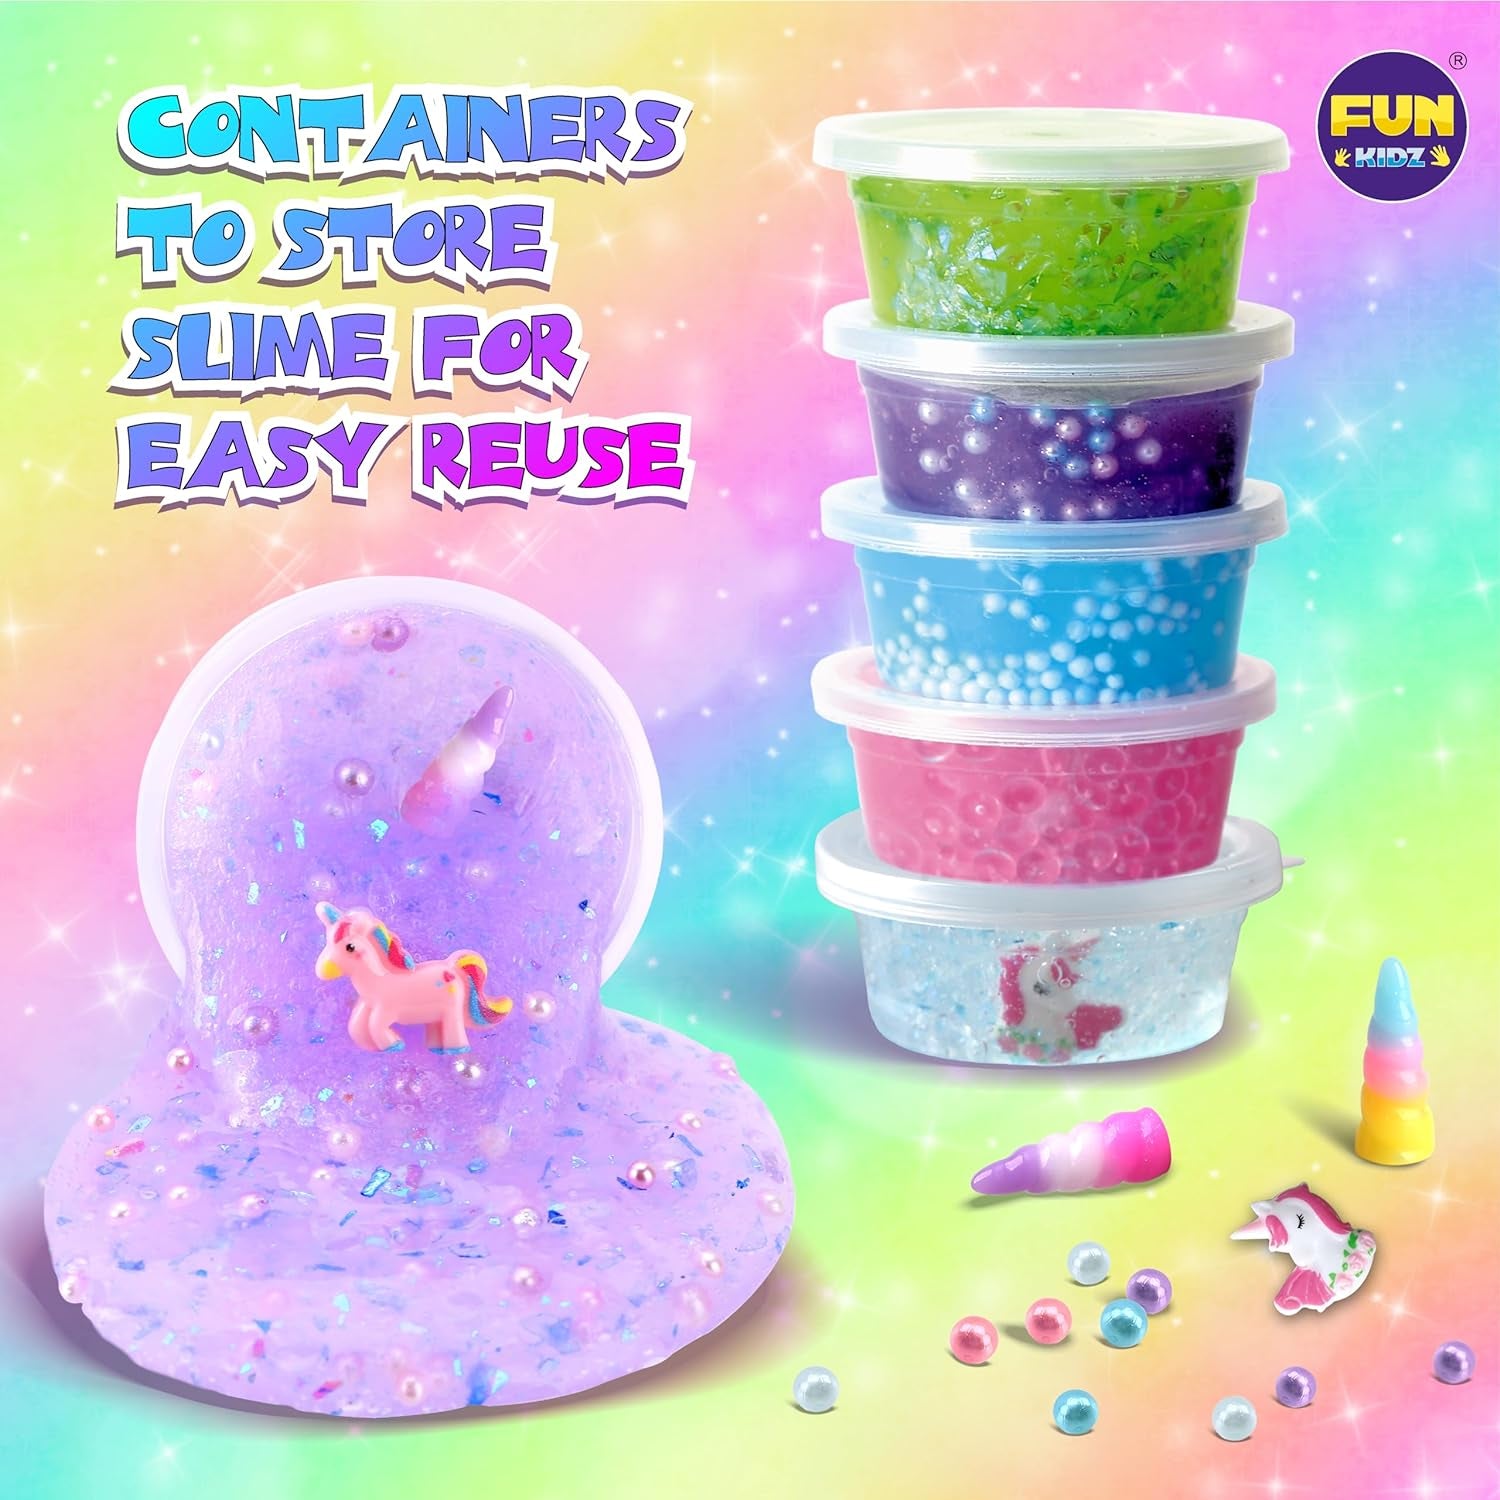 Fluffy Unicorn Slime Kit for Girls, Funkidz Cloud Slime Gift for Ages 6+ Kids Fun Slime Making Kit Awesome Craft Toy Birthday Present Ideas